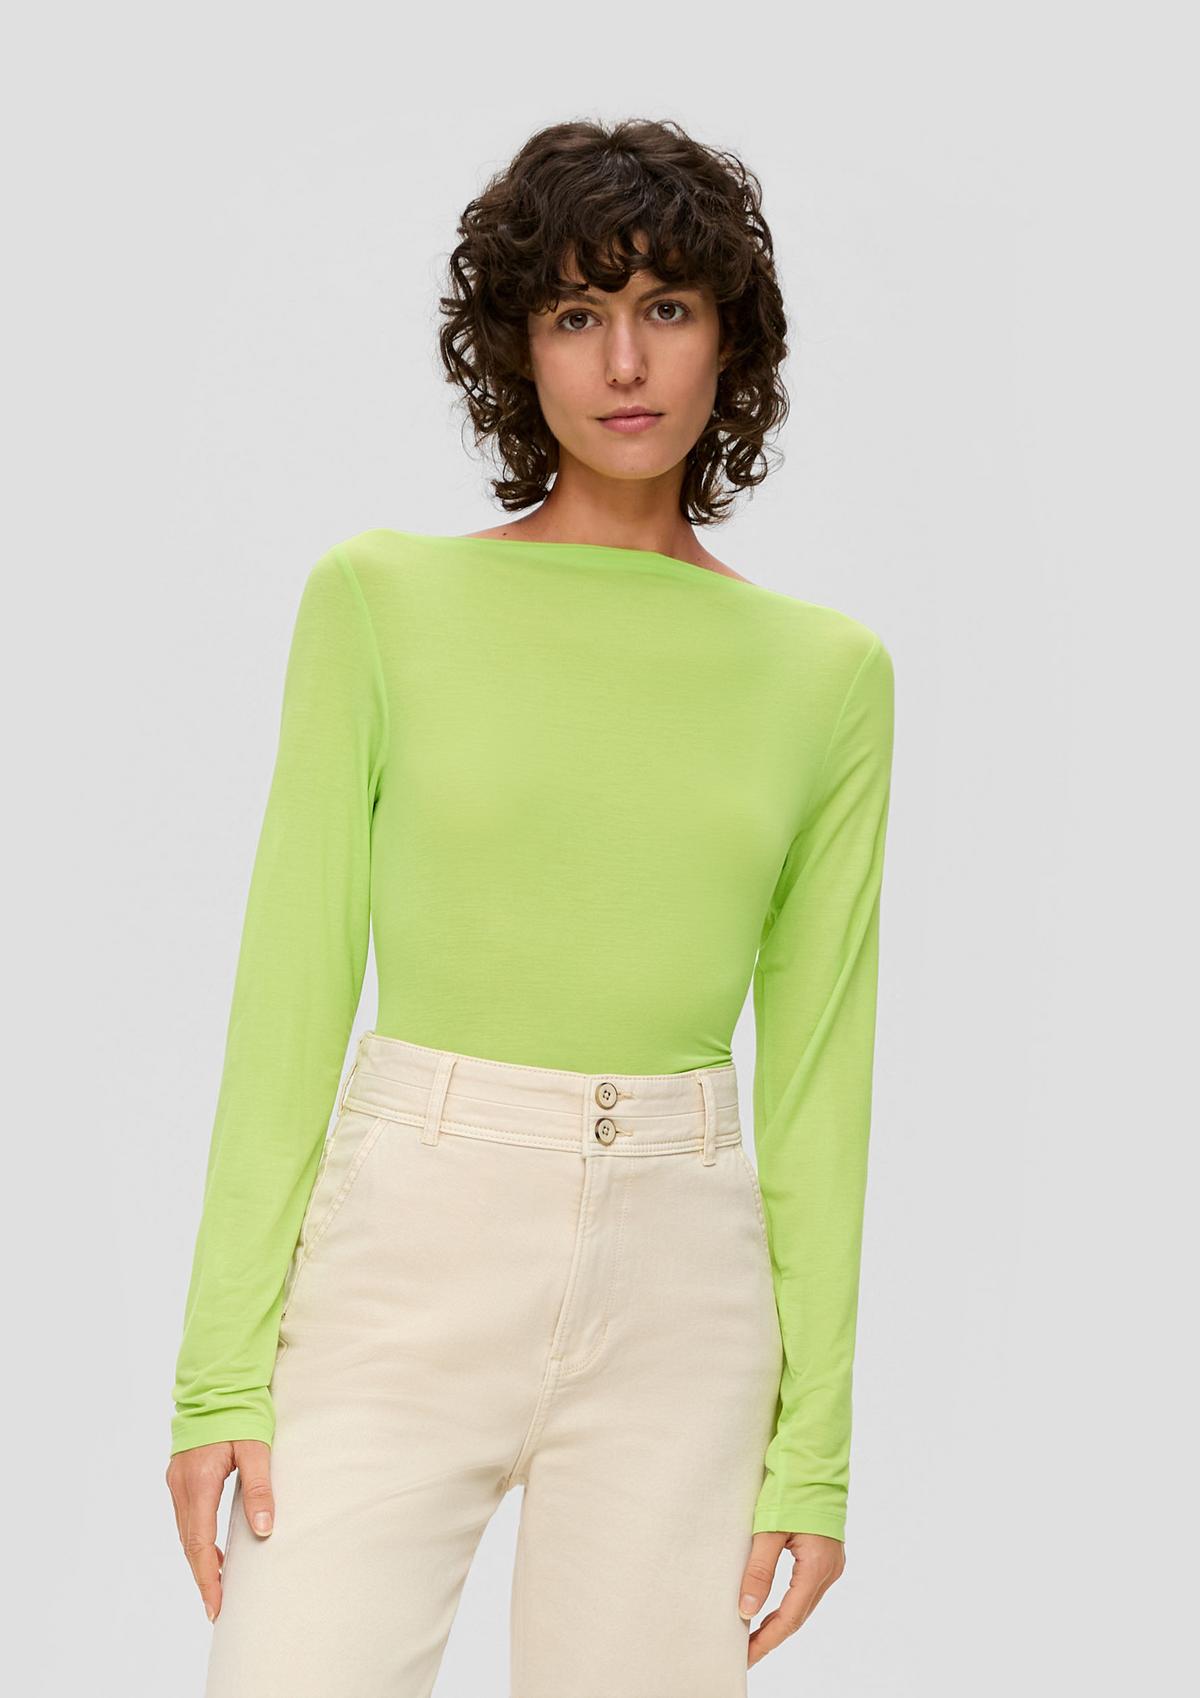 Slim fit long sleeve top in a lyocell blend